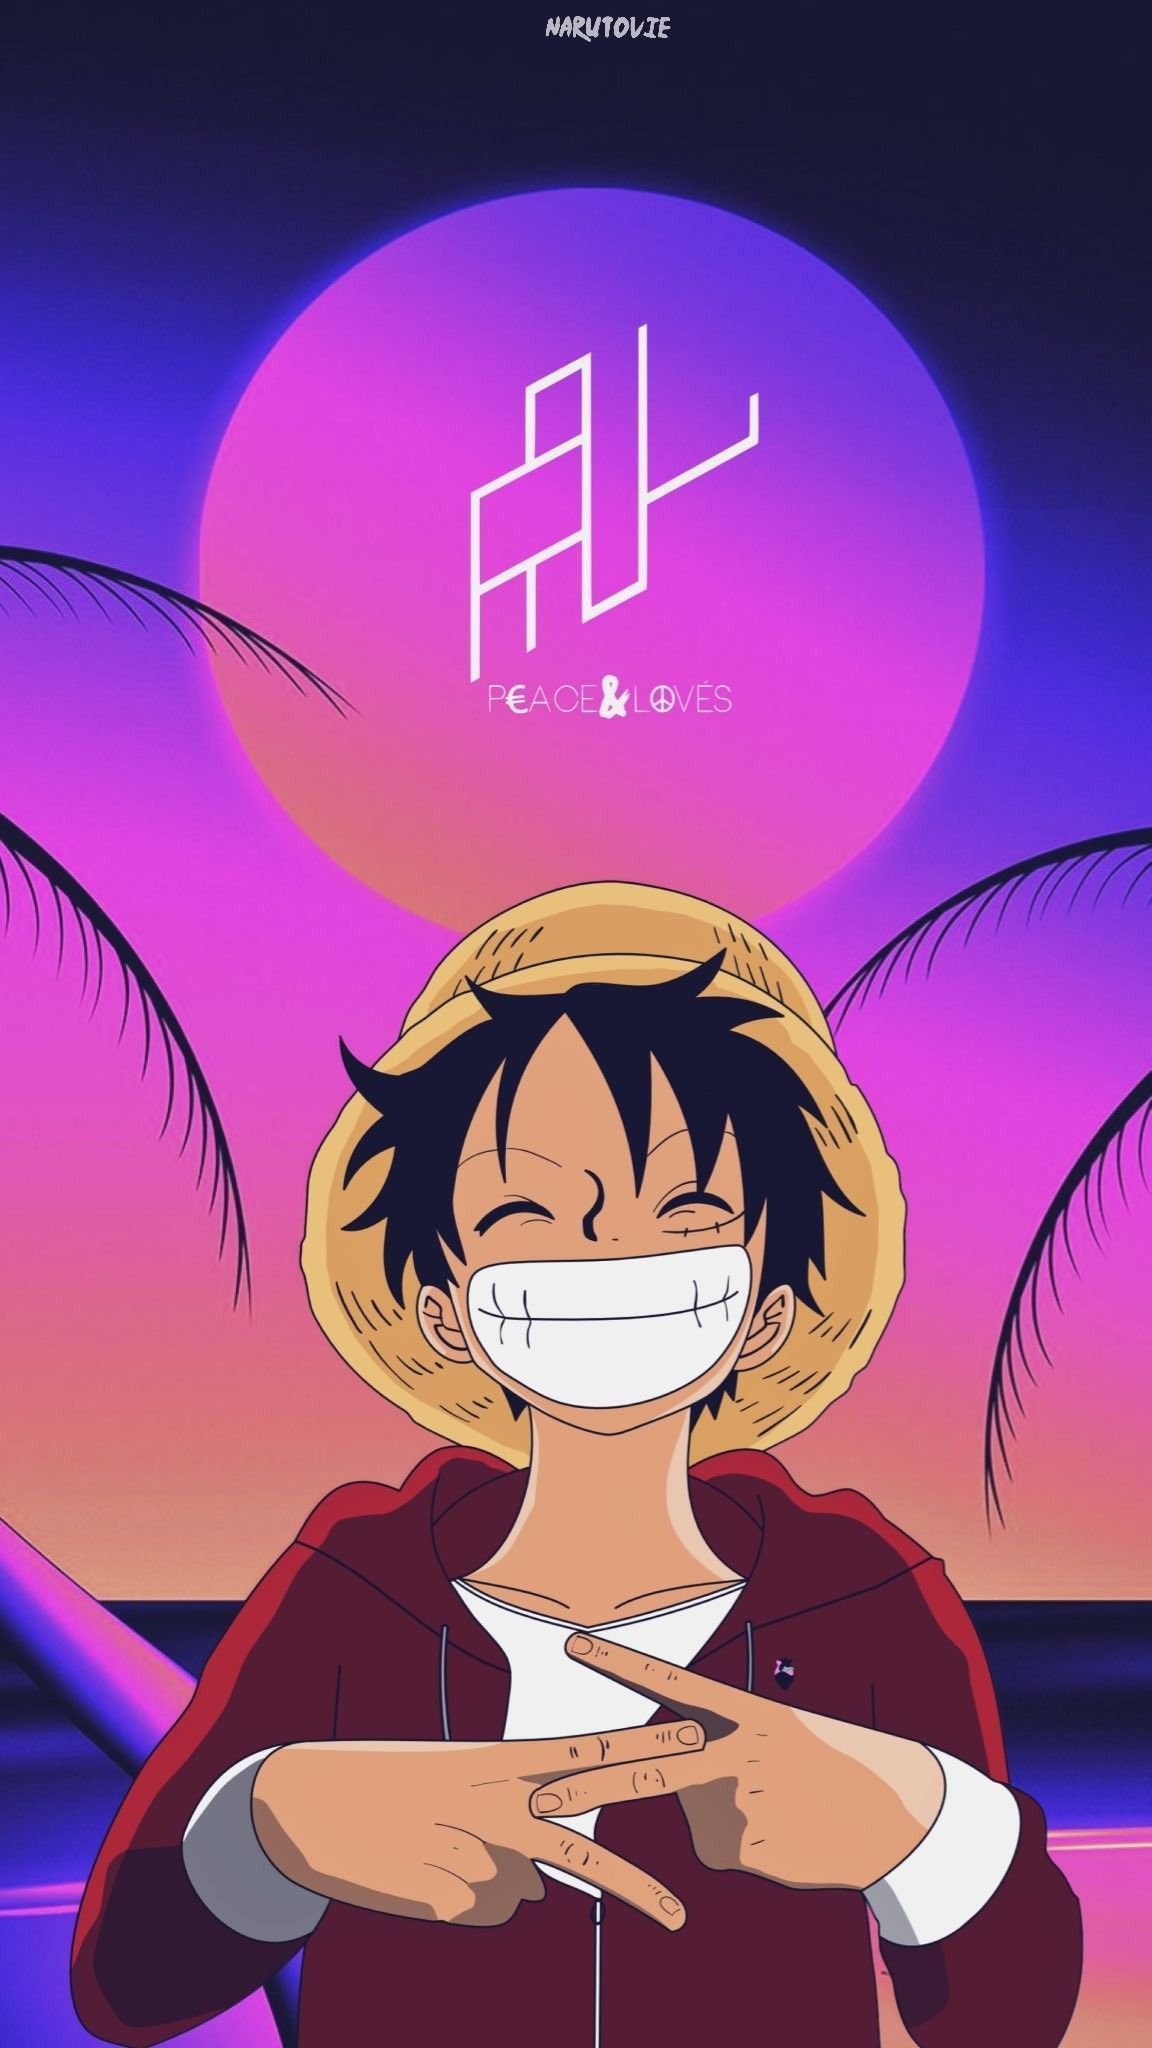 Luffy smiling with a peace sign - One Piece